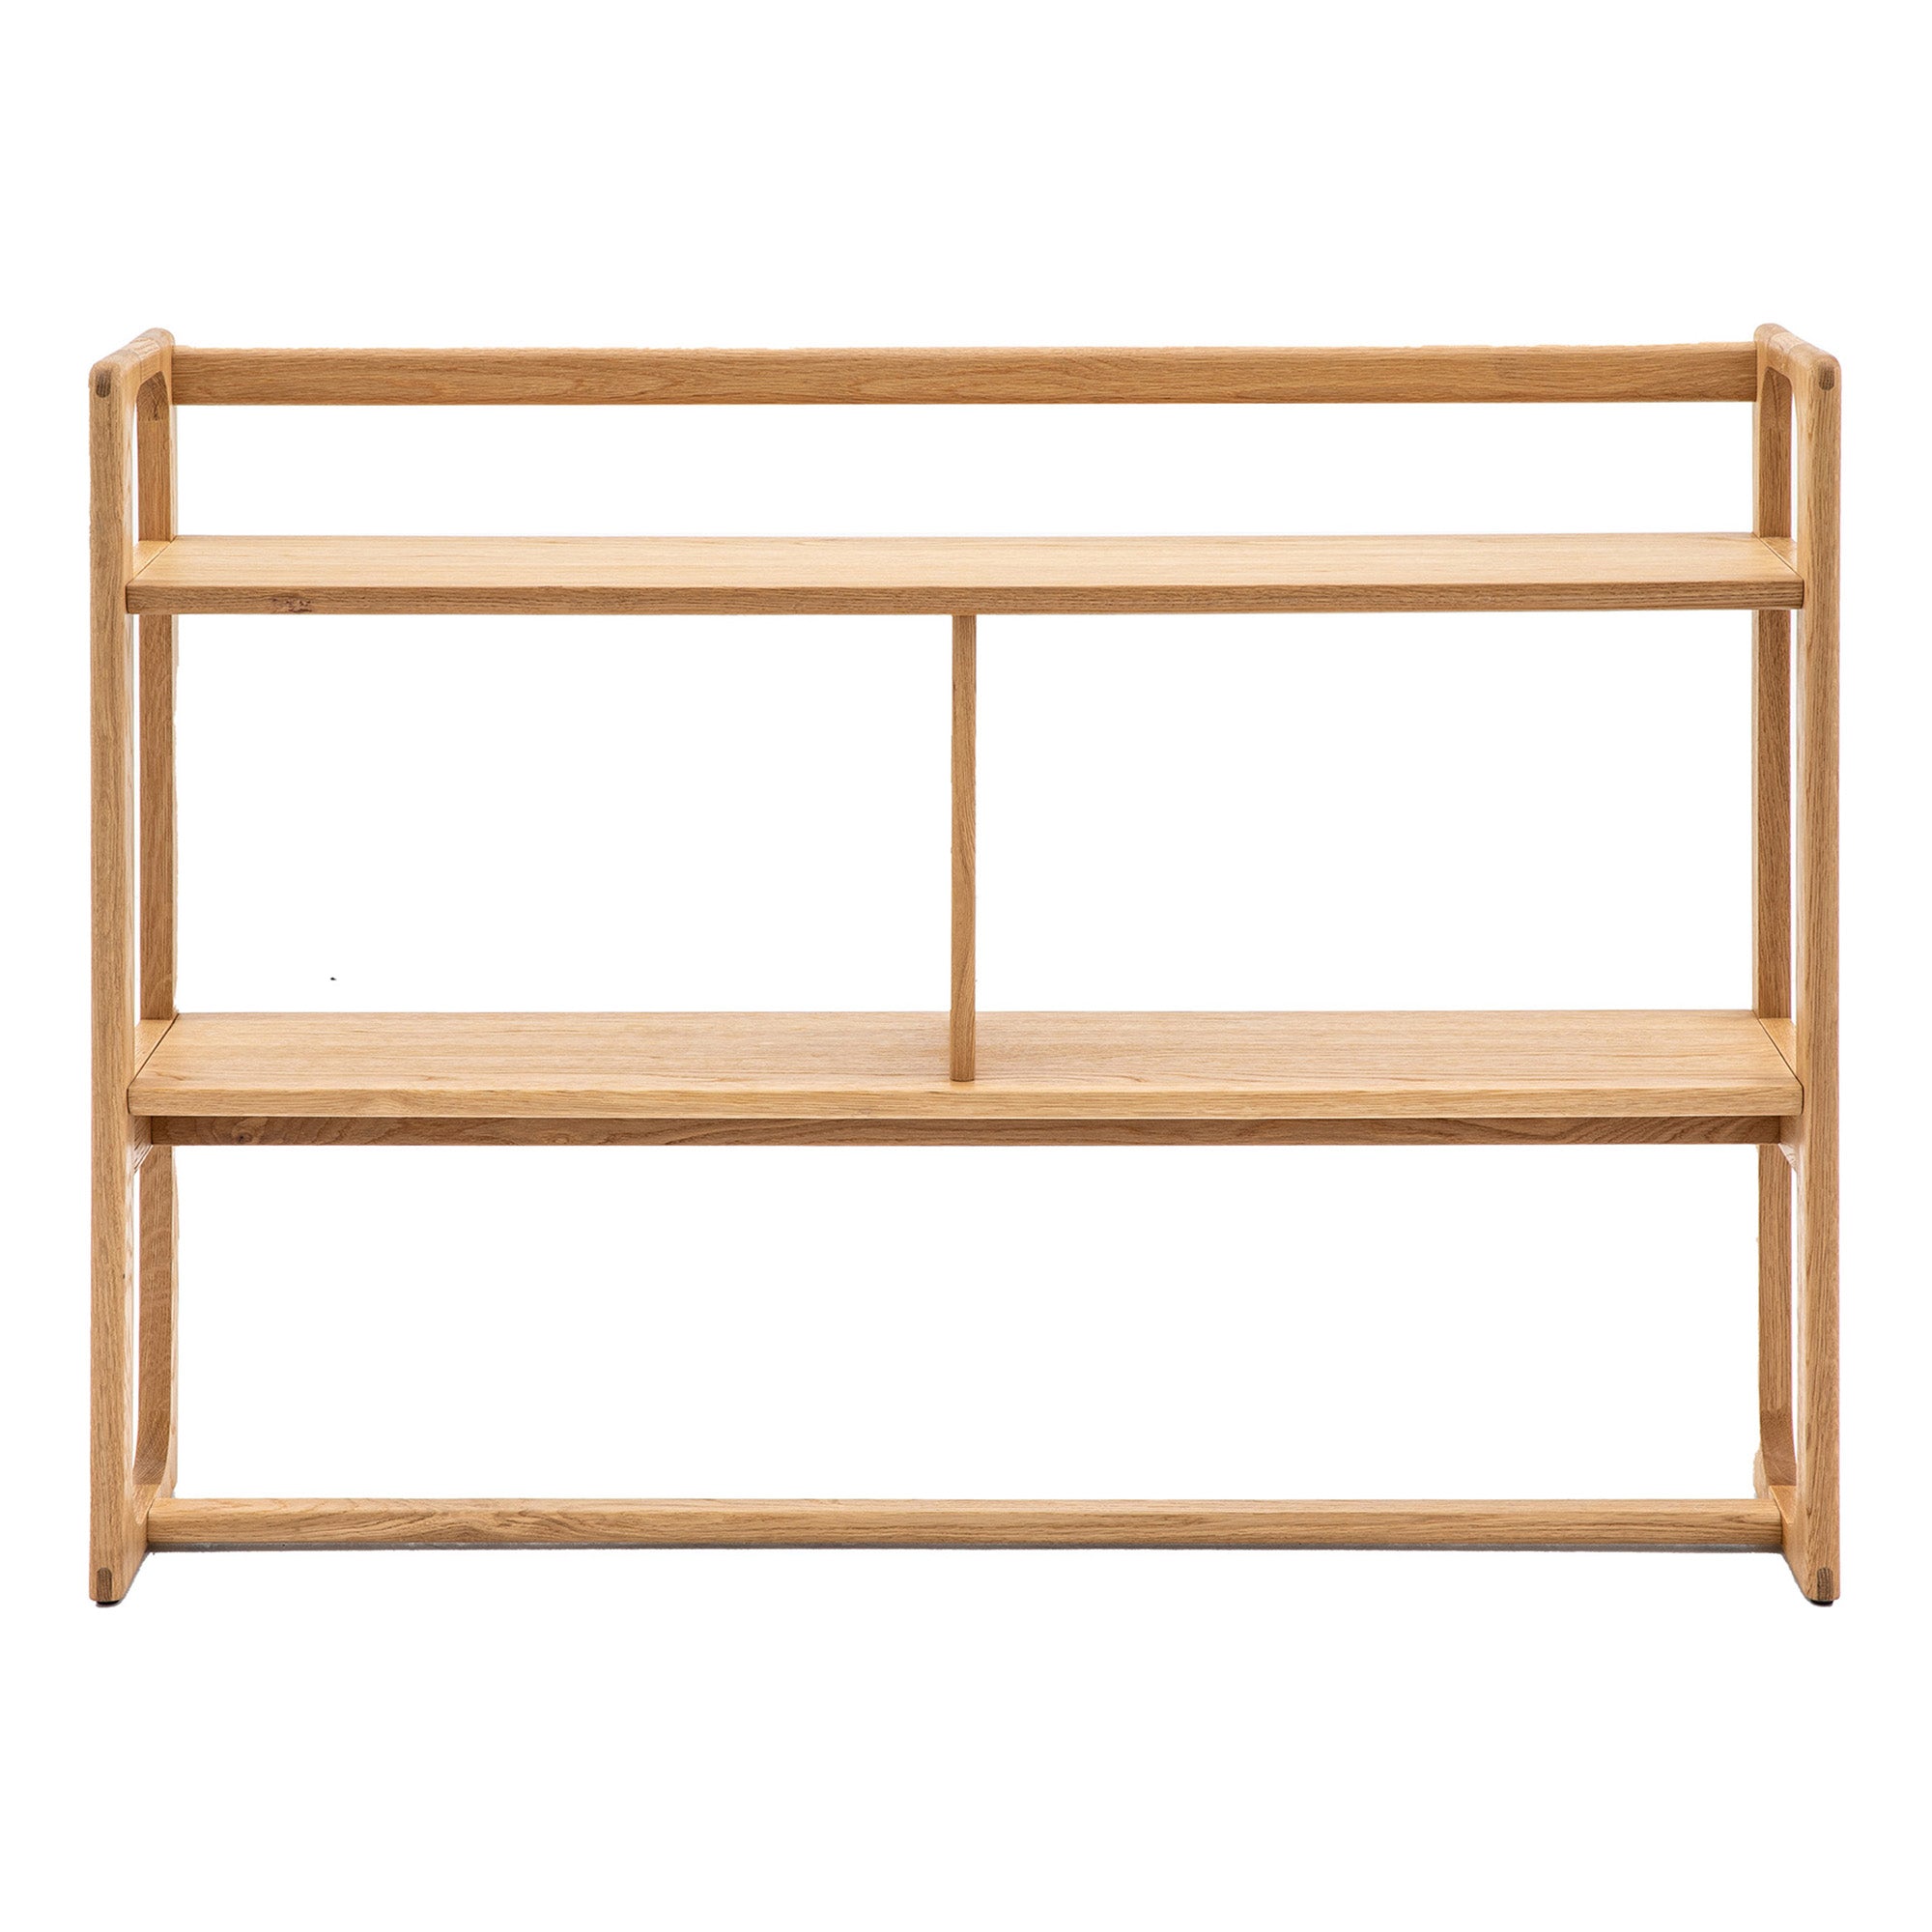 The Finest Wooden Shelving Unit